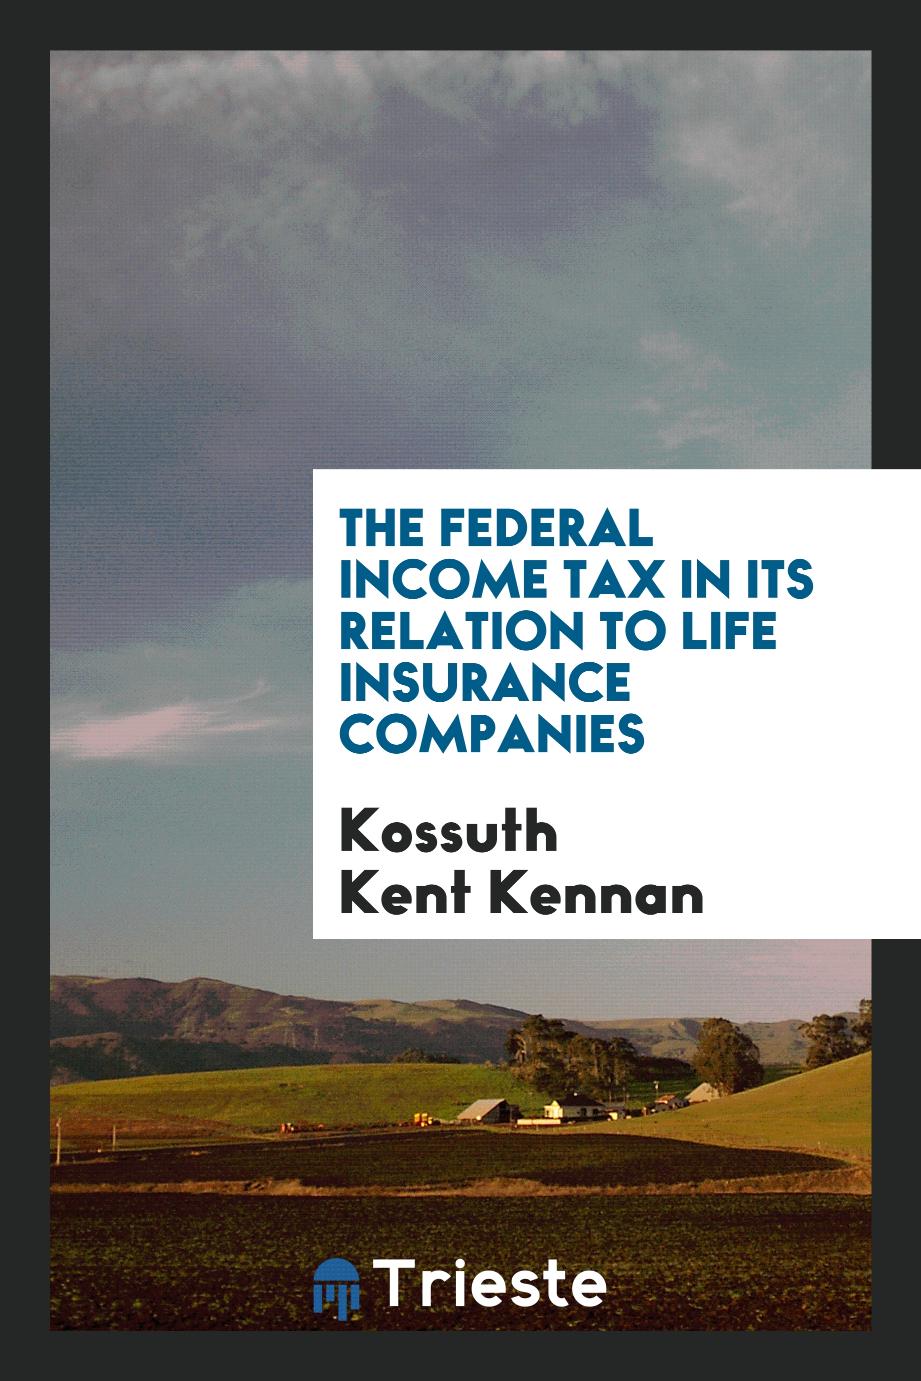 The Federal Income Tax in Its Relation to Life Insurance Companies